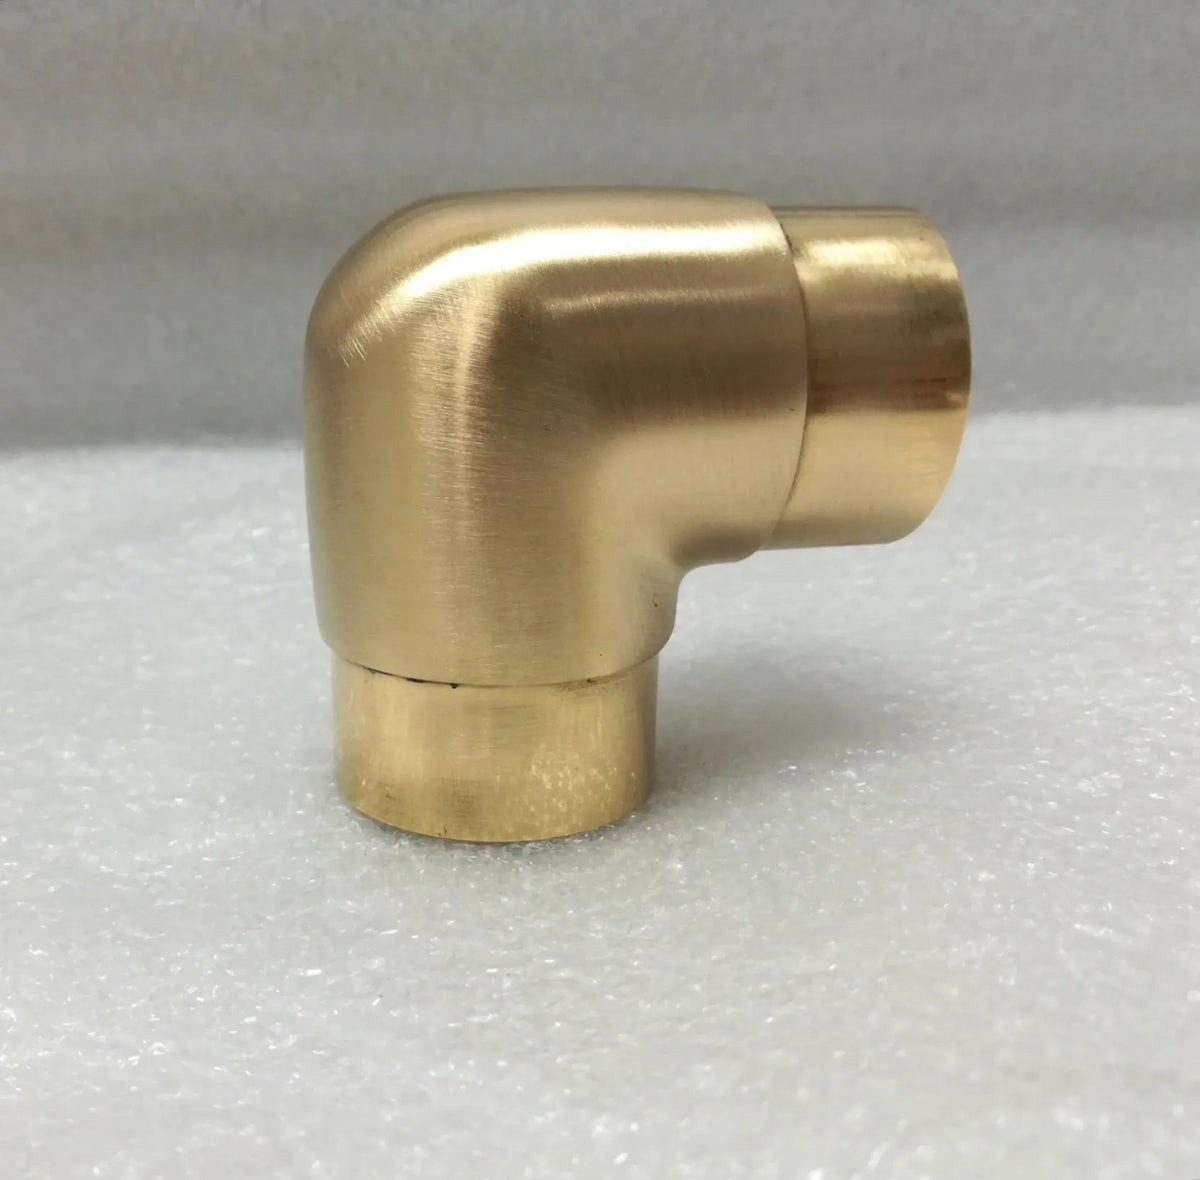 Flush Elbow for 1-1/2" Diameter Tubing FLUSH FITTING,COMPONENTS FOR 1-1/2" OD TUBINGTrade Diversified